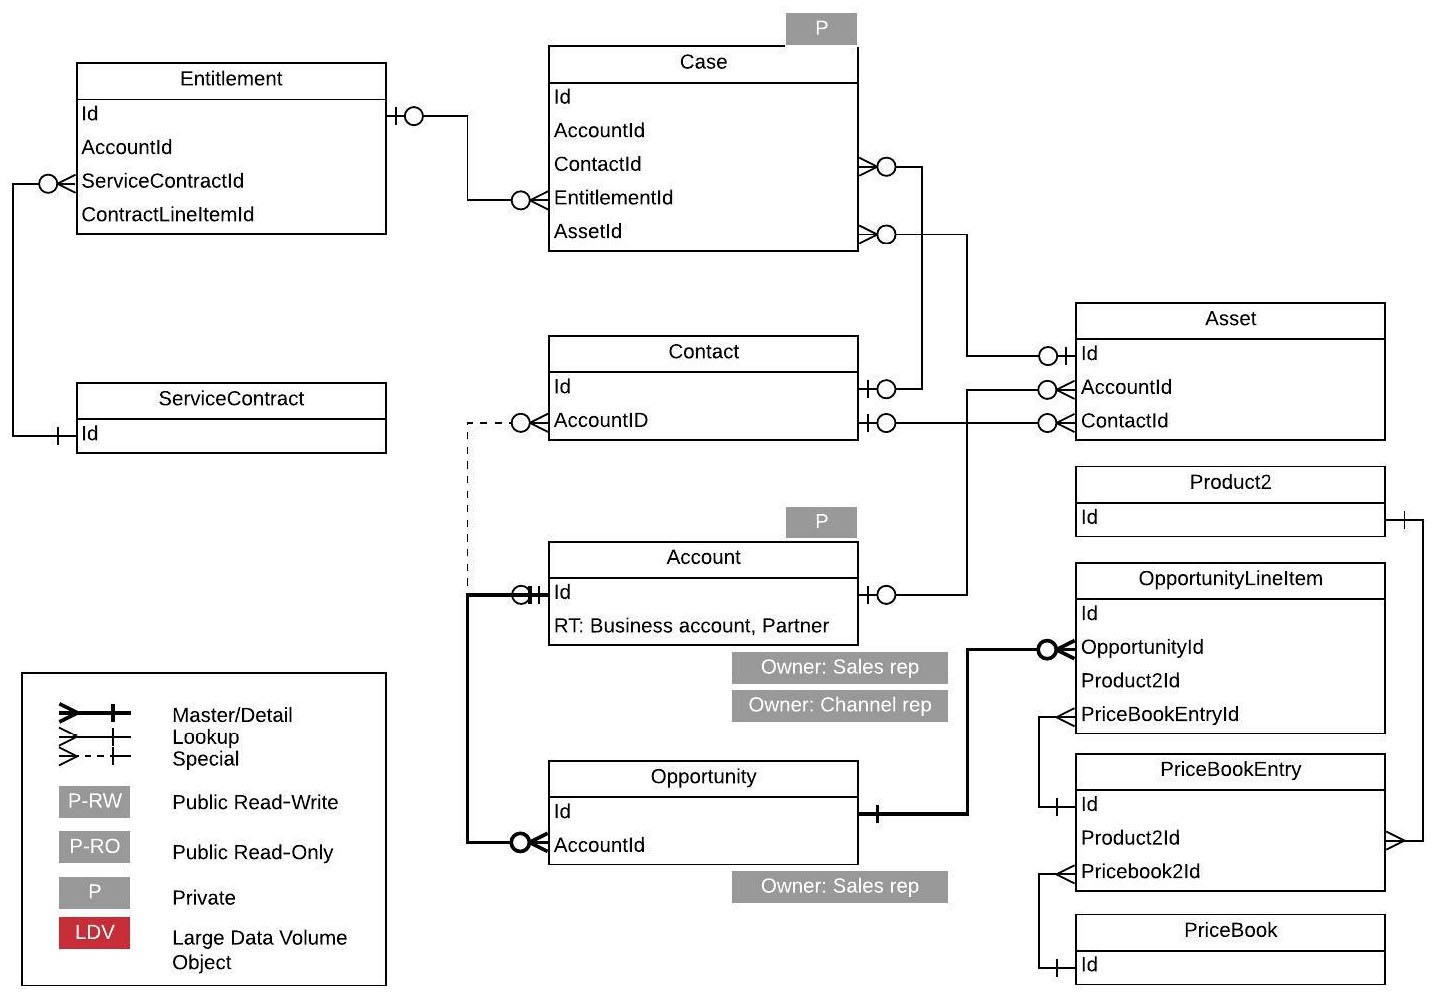 This is the final version of data model. It has interconnected boxes labelled ‘ServiceContract’, ‘Entitlement’, ‘Case’, ‘Contact’, ‘Account’, ‘Opportunity’, ‘Asset’, ‘Product2’, ‘OpportunityLineItem’, ‘PriceBookEntry’, ‘Pricebook’.